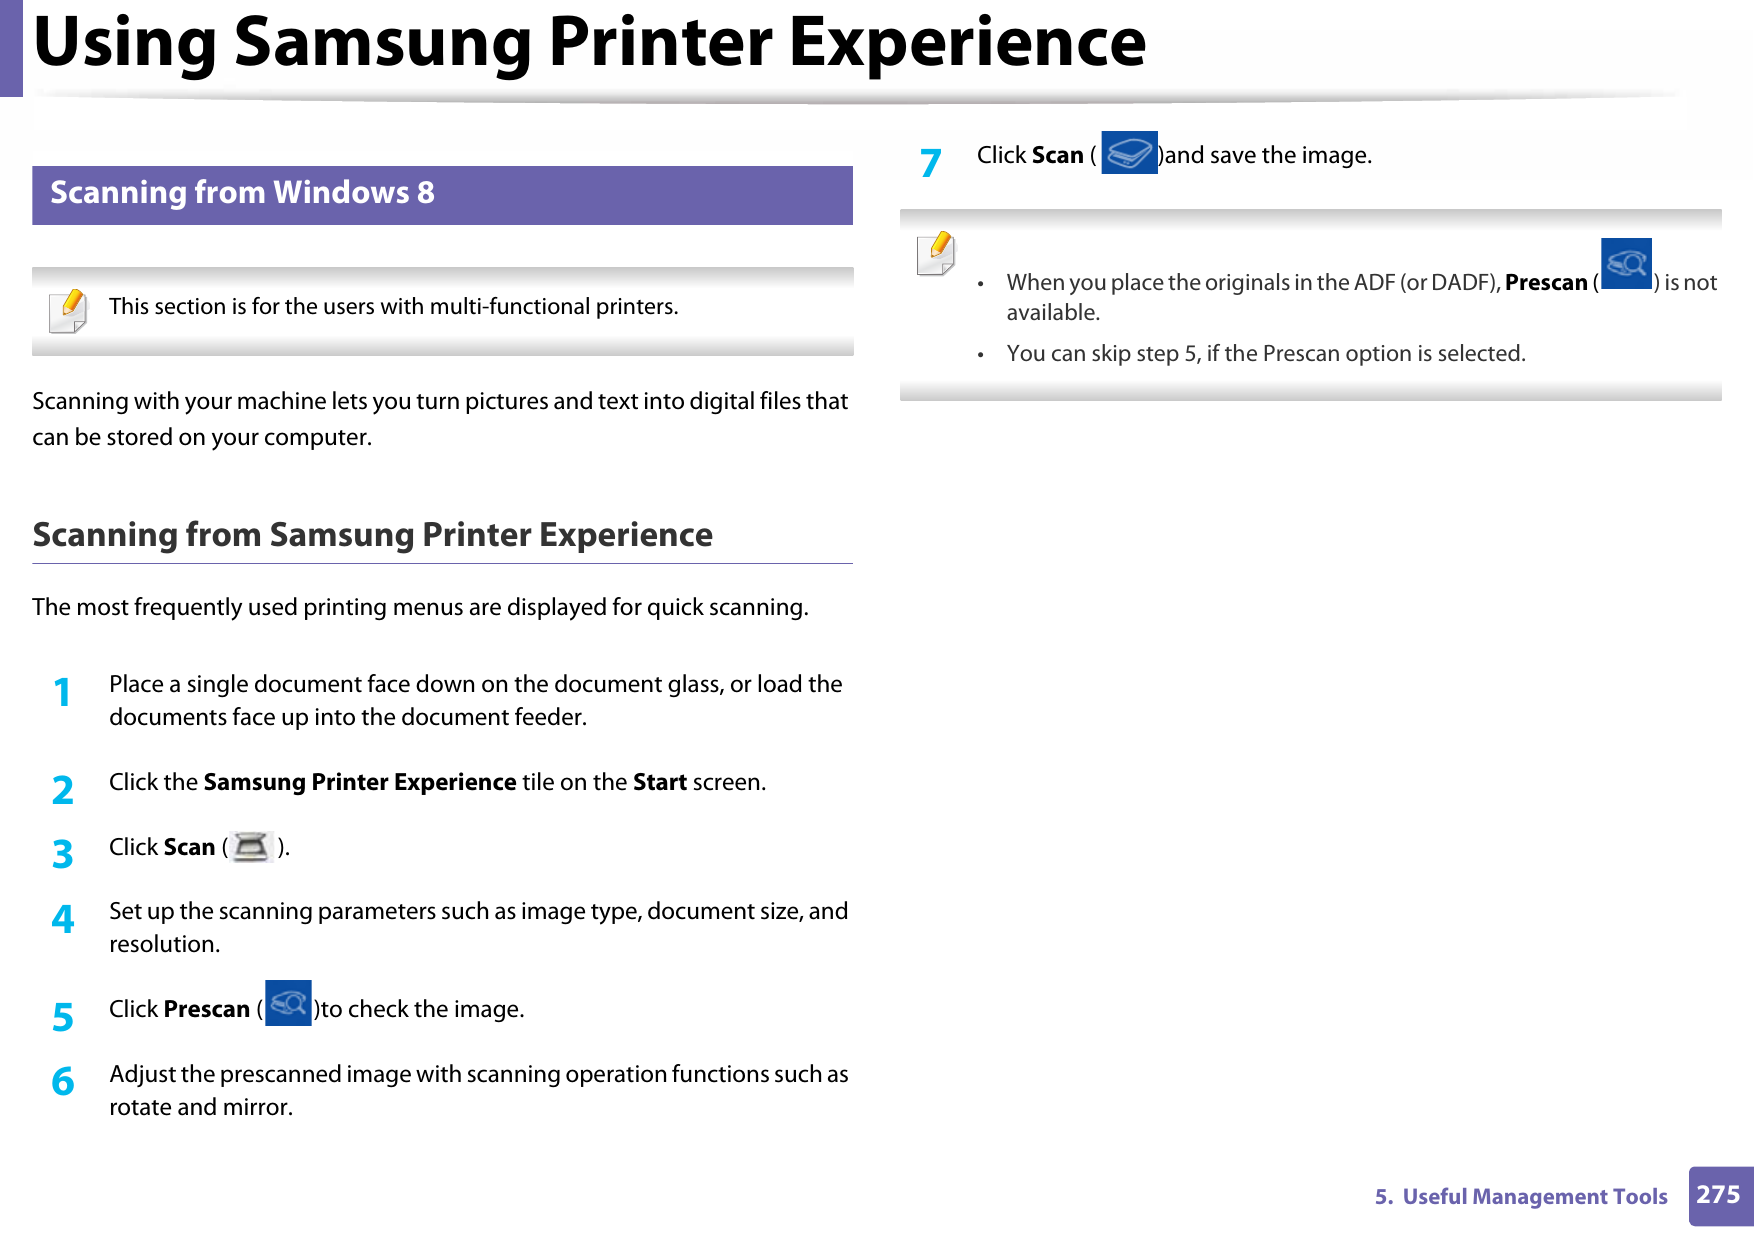 Using Samsung Printer Experience2755.  Useful Management Tools11 Scanning from Windows 8 This section is for the users with multi-functional printers. Scanning with your machine lets you turn pictures and text into digital files that can be stored on your computer.Scanning from Samsung Printer ExperienceThe most frequently used printing menus are displayed for quick scanning.1Place a single document face down on the document glass, or load the documents face up into the document feeder.2  Click the Samsung Printer Experience tile on the Start screen.3  Click Scan ().4  Set up the scanning parameters such as image type, document size, and resolution.5  Click Prescan ( )to check the image.6  Adjust the prescanned image with scanning operation functions such as rotate and mirror.7  Click Scan ( )and save the image.  • When you place the originals in the ADF (or DADF), Prescan ( ) is not available.• You can skip step 5, if the Prescan option is selected.  